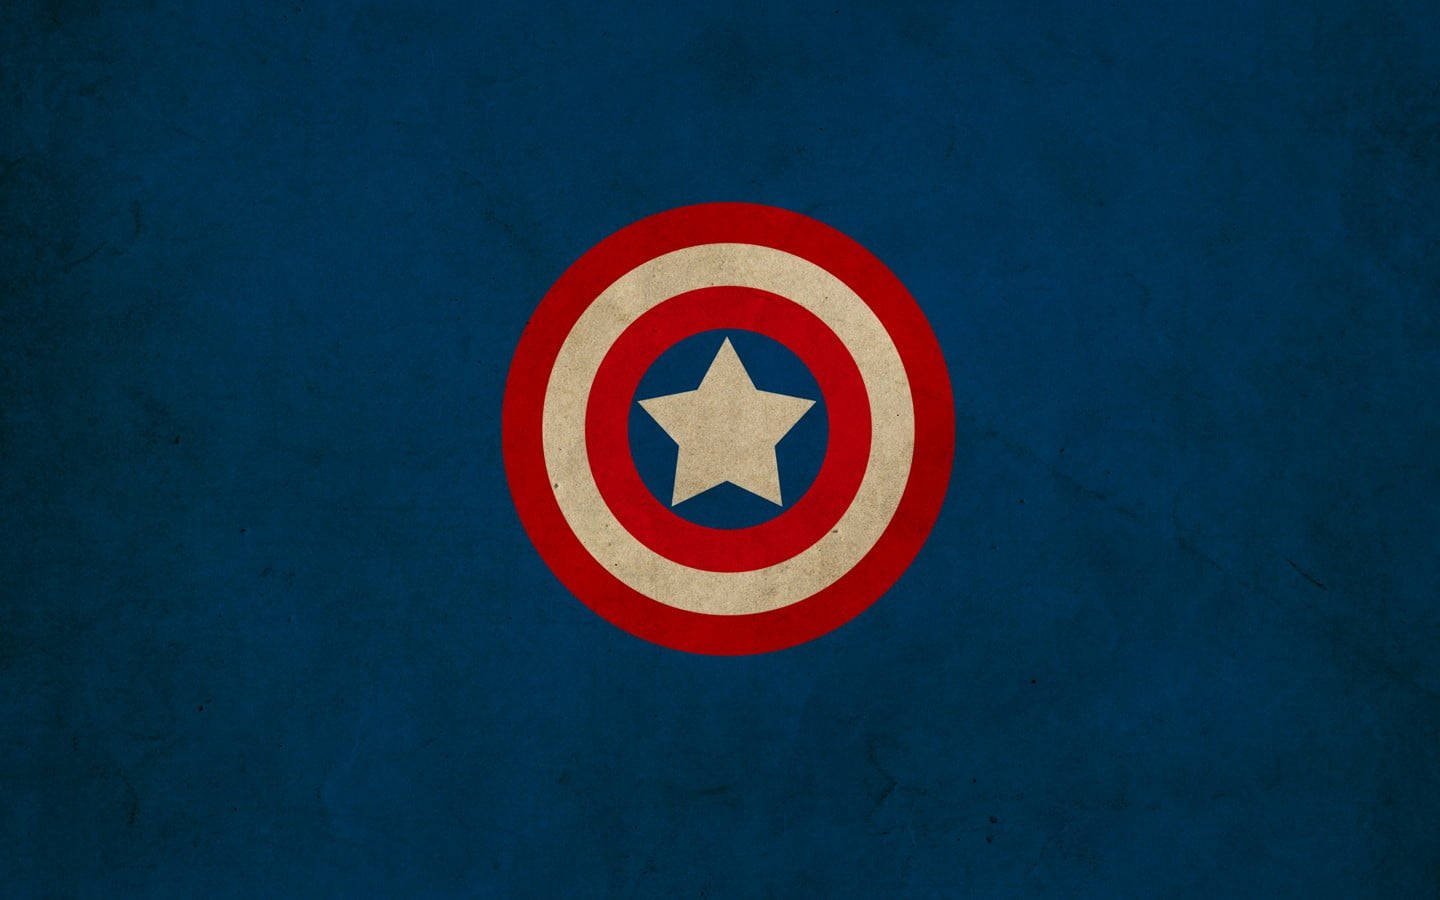 Captain America is ready to take on the world! Wallpaper